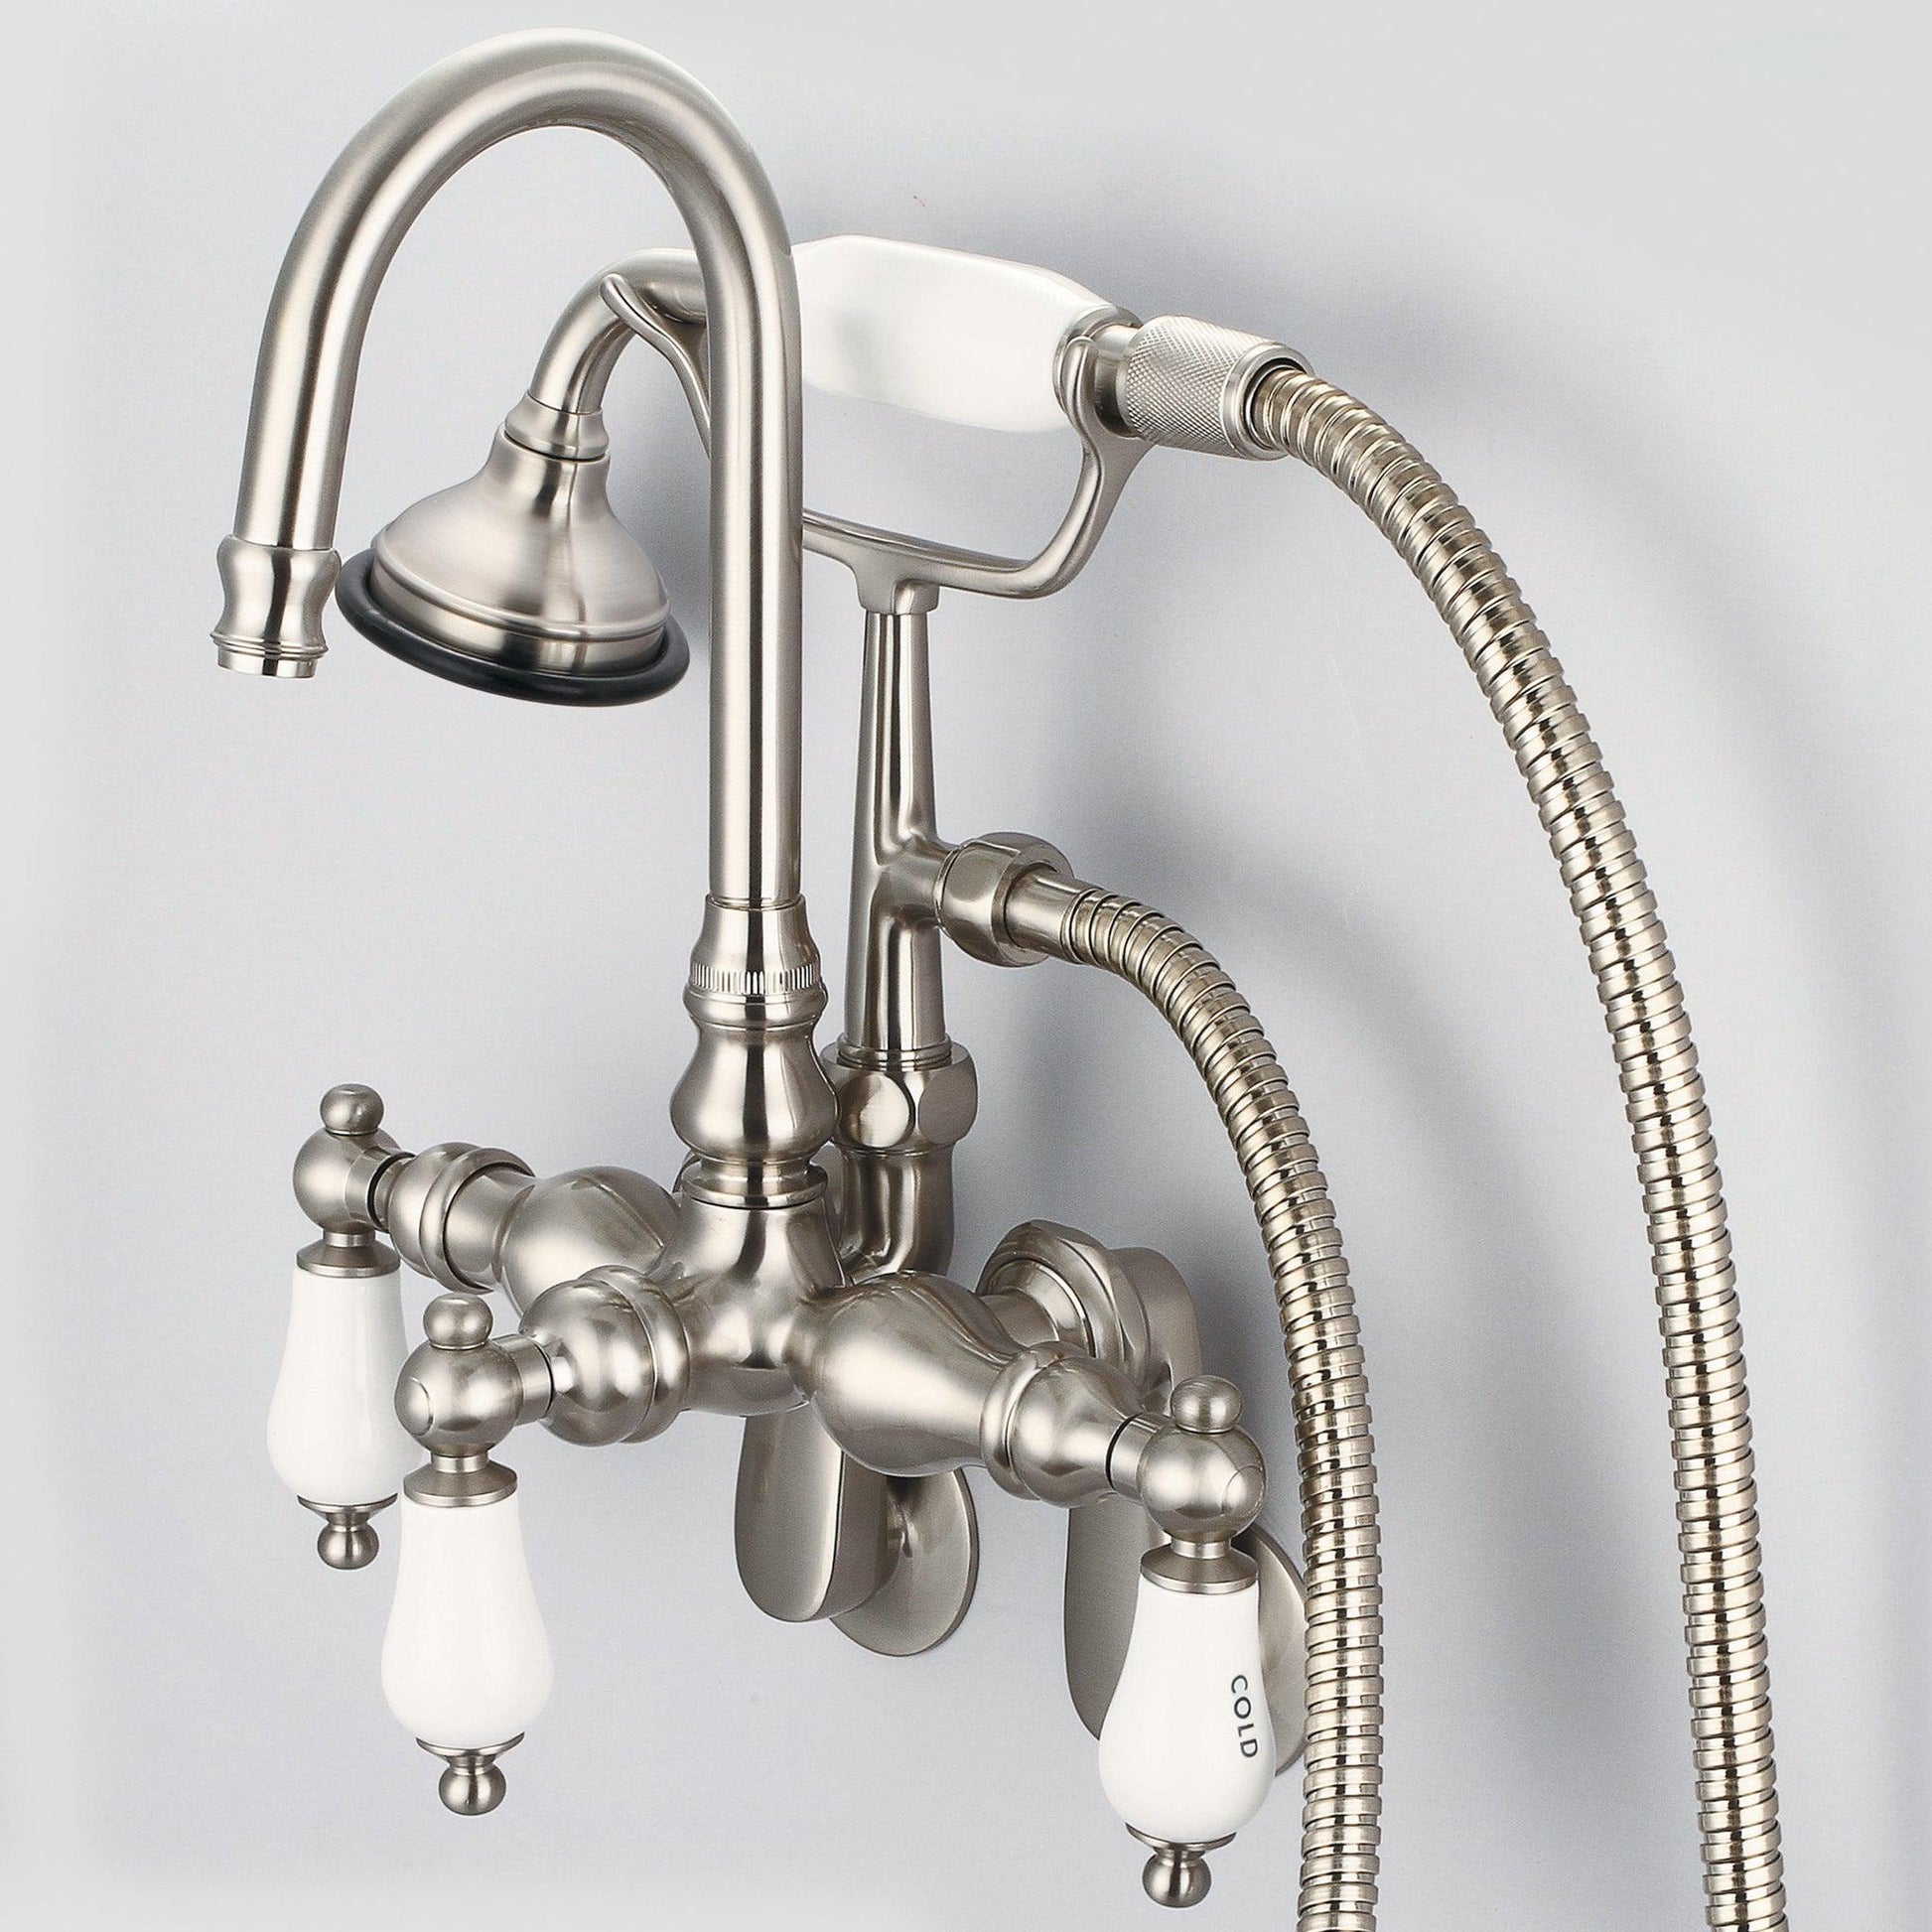 Water Creation Vintage Classic Adjustable Spread Wall Mount Tub F6-0011 9.25" Grey Solid Brass Faucet With Gooseneck Spout, Swivel Wall Connector And Handheld Shower And Porcelain Lever Handles, Hot And Cold Labels Included